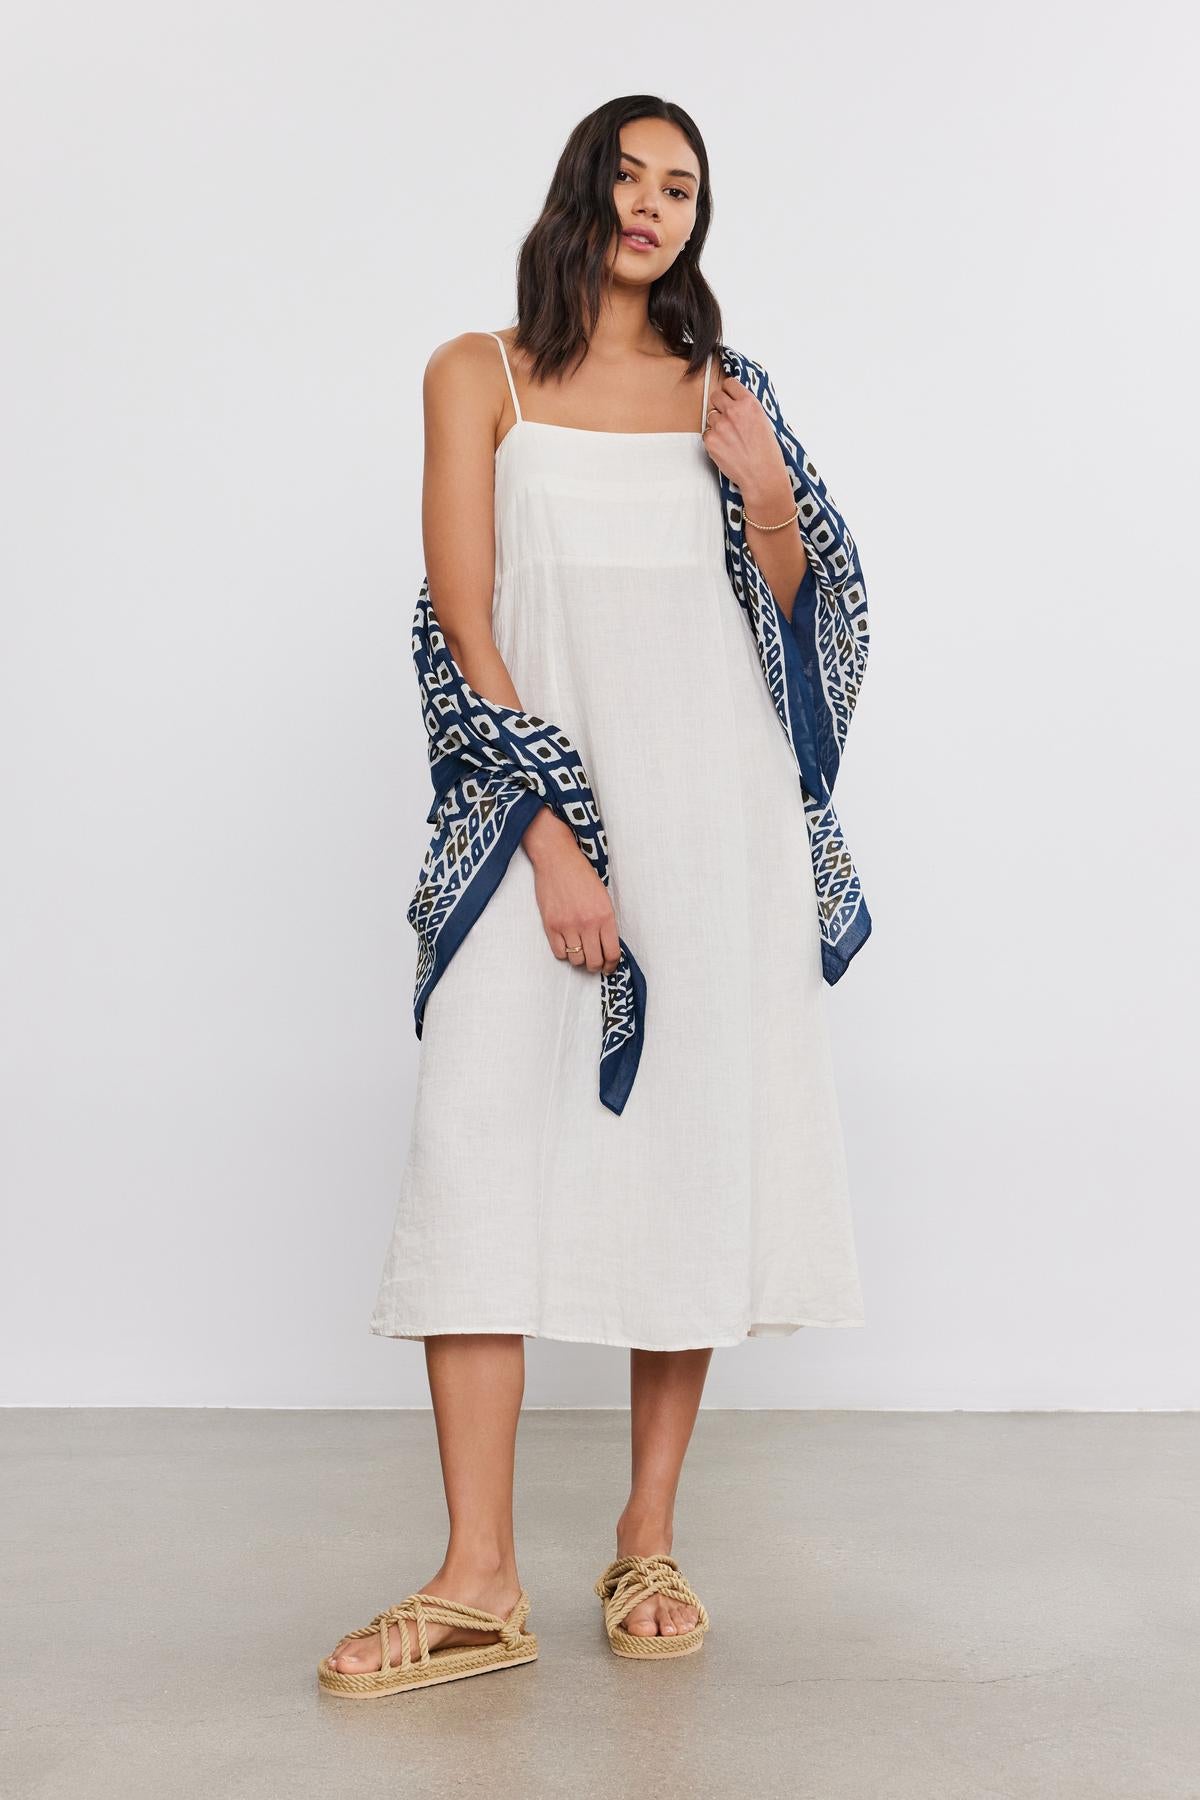   A woman in a white midi dress and patterned blue scarf stands confidently, holding the Velvet by Graham & Spencer sarong wrap with one hand, and wearing gold sandals. 